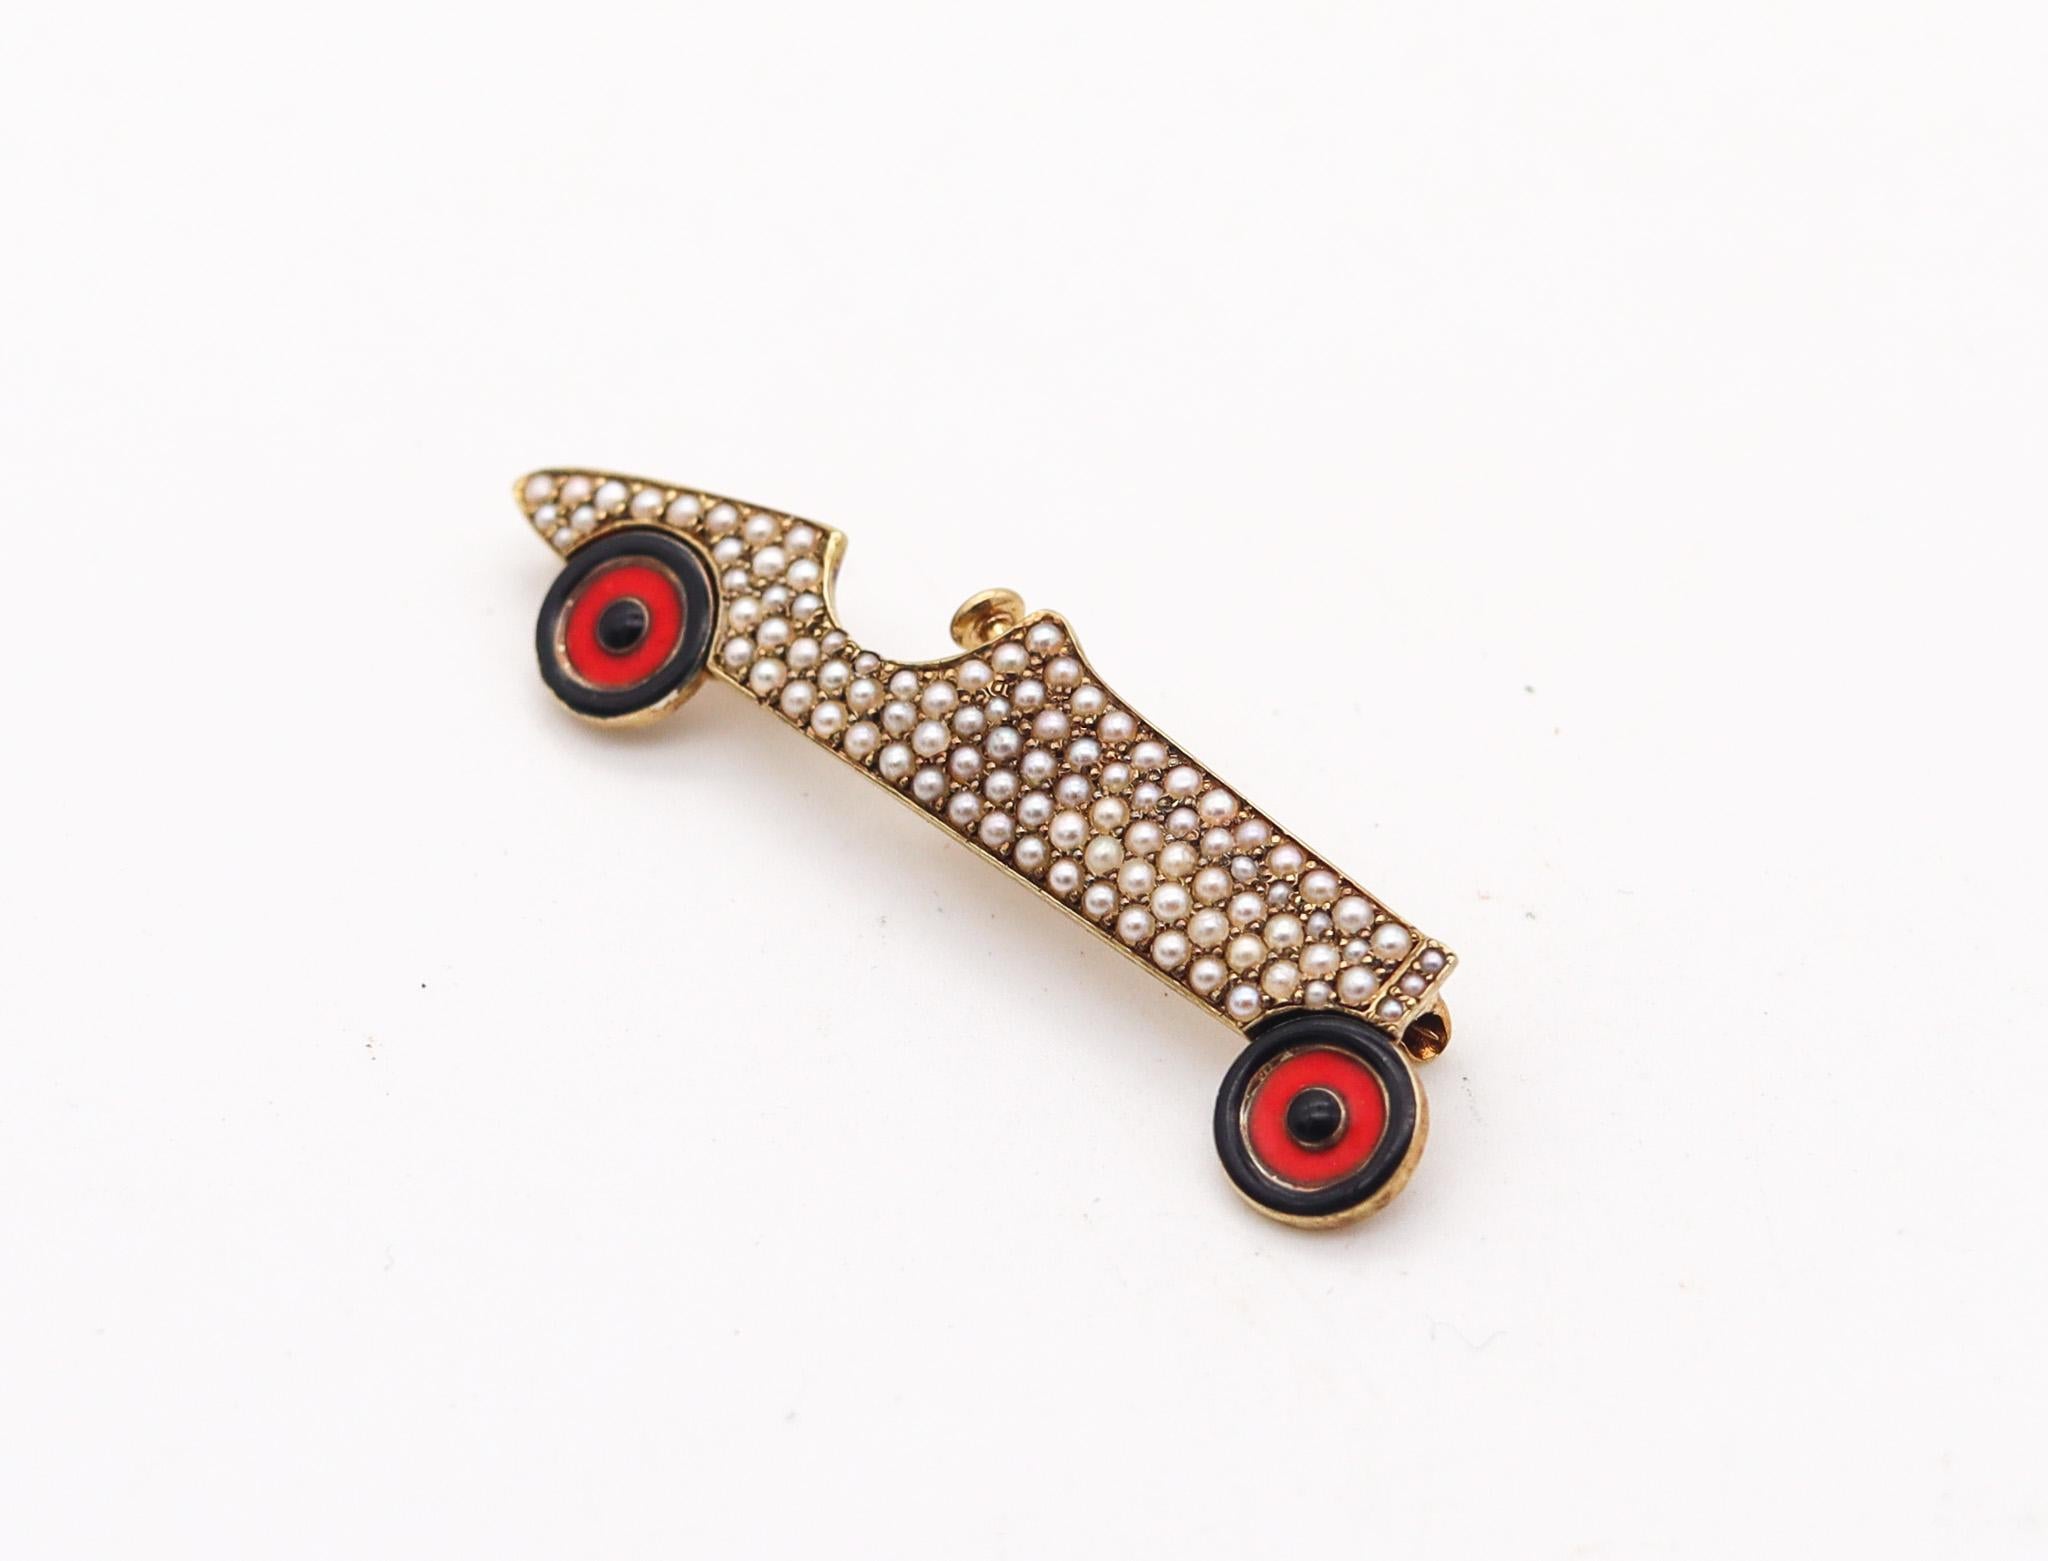 An art deco racing car brooch designed by Sloan & Company

This is a fabulous racing car brooch, made in America during the art deco period, back in the 1920's. Created in Newark New Jersey by the famed jewelry makers of Sloan & Co. This is one of